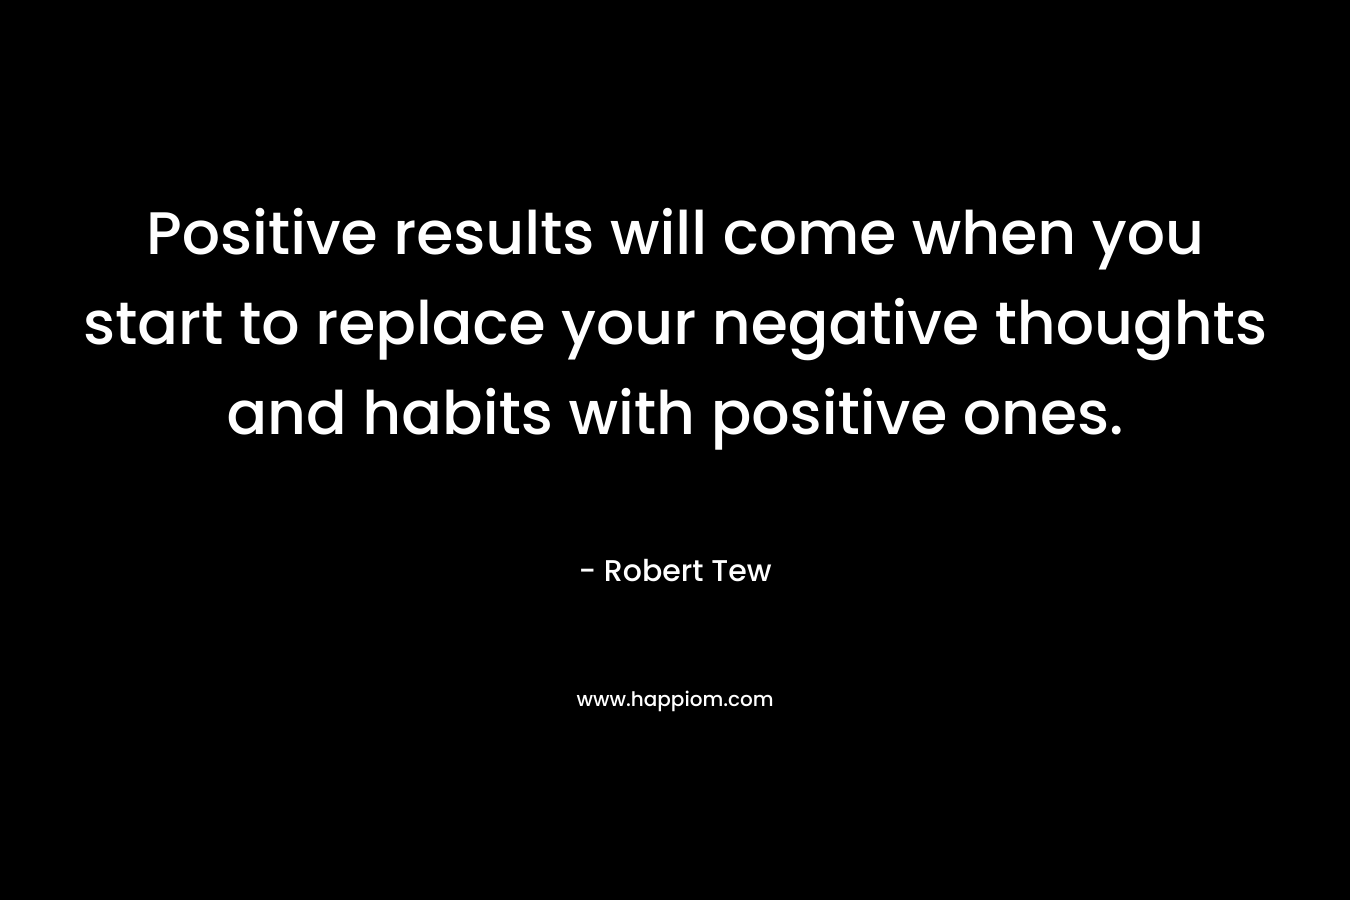 Positive results will come when you start to replace your negative thoughts and habits with positive ones.